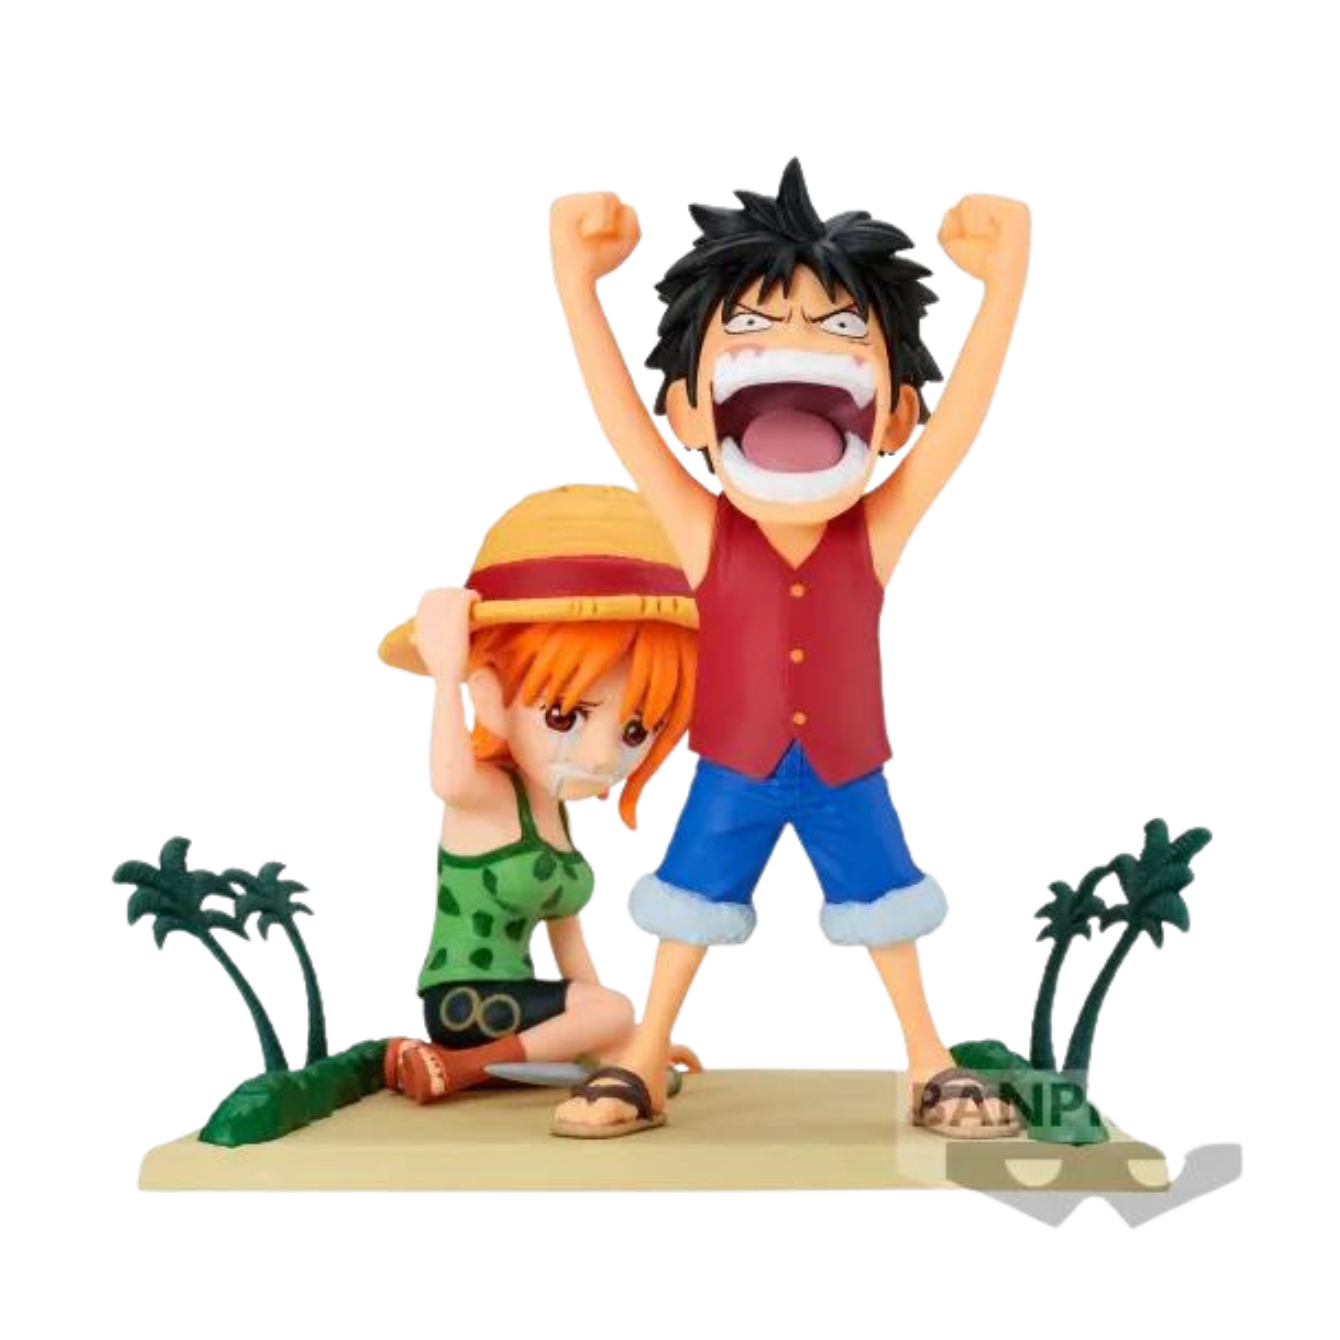 Monkey.D.Luffy and Nami "One Piece", Banpresto World Collectable Figure Log Stories